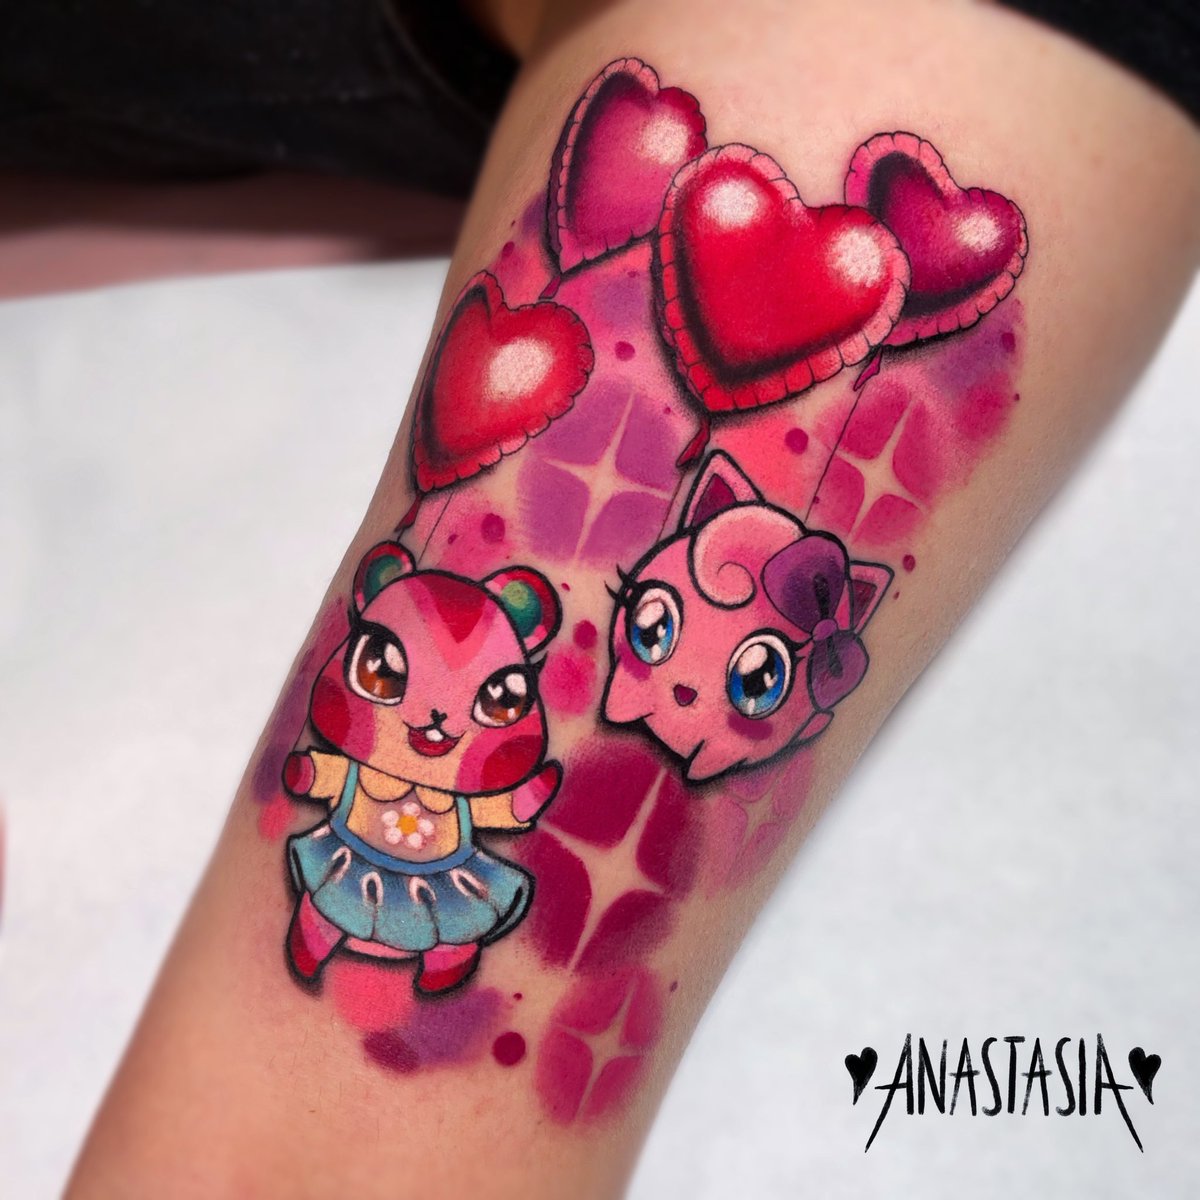 🍎 APPLE & JIGGLYPUFF 💖
Two best friends floating around in a pink paradise ☺️✨
I loved tattooing these babies, which one is your favorite Animal Crossing villager? 🌸
#animalcrossing #AnimalCrossingTattoo #ACNH #tattoo #kawaii #kawaiitattoo #pokemon